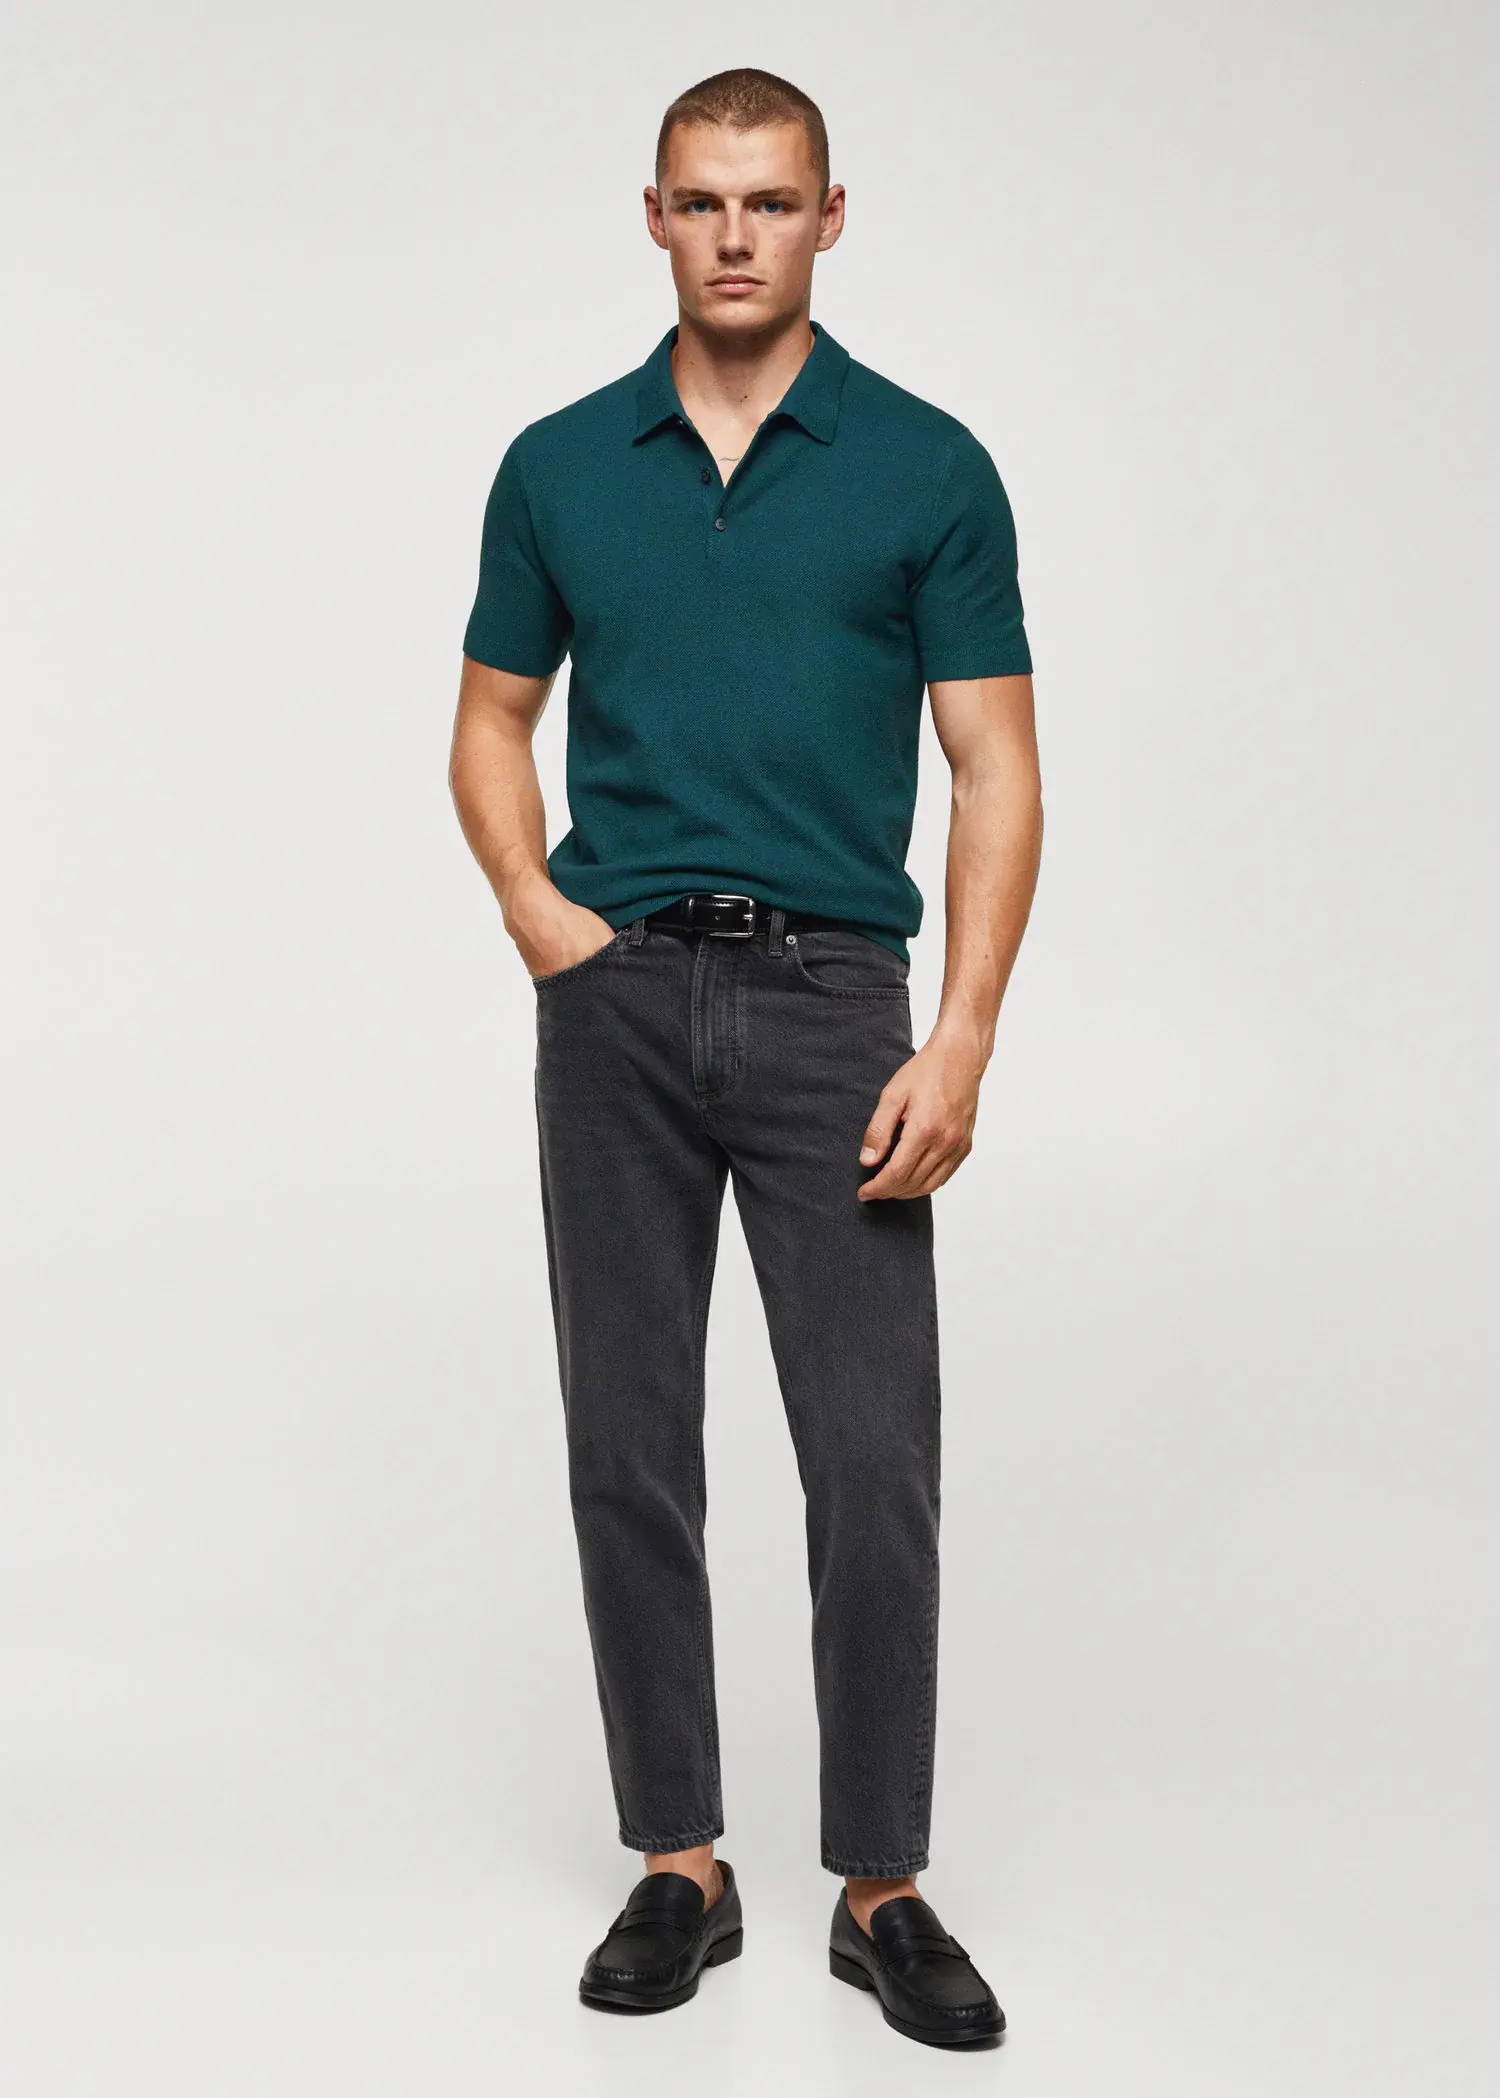 Mango Structured knit cotton polo. 2